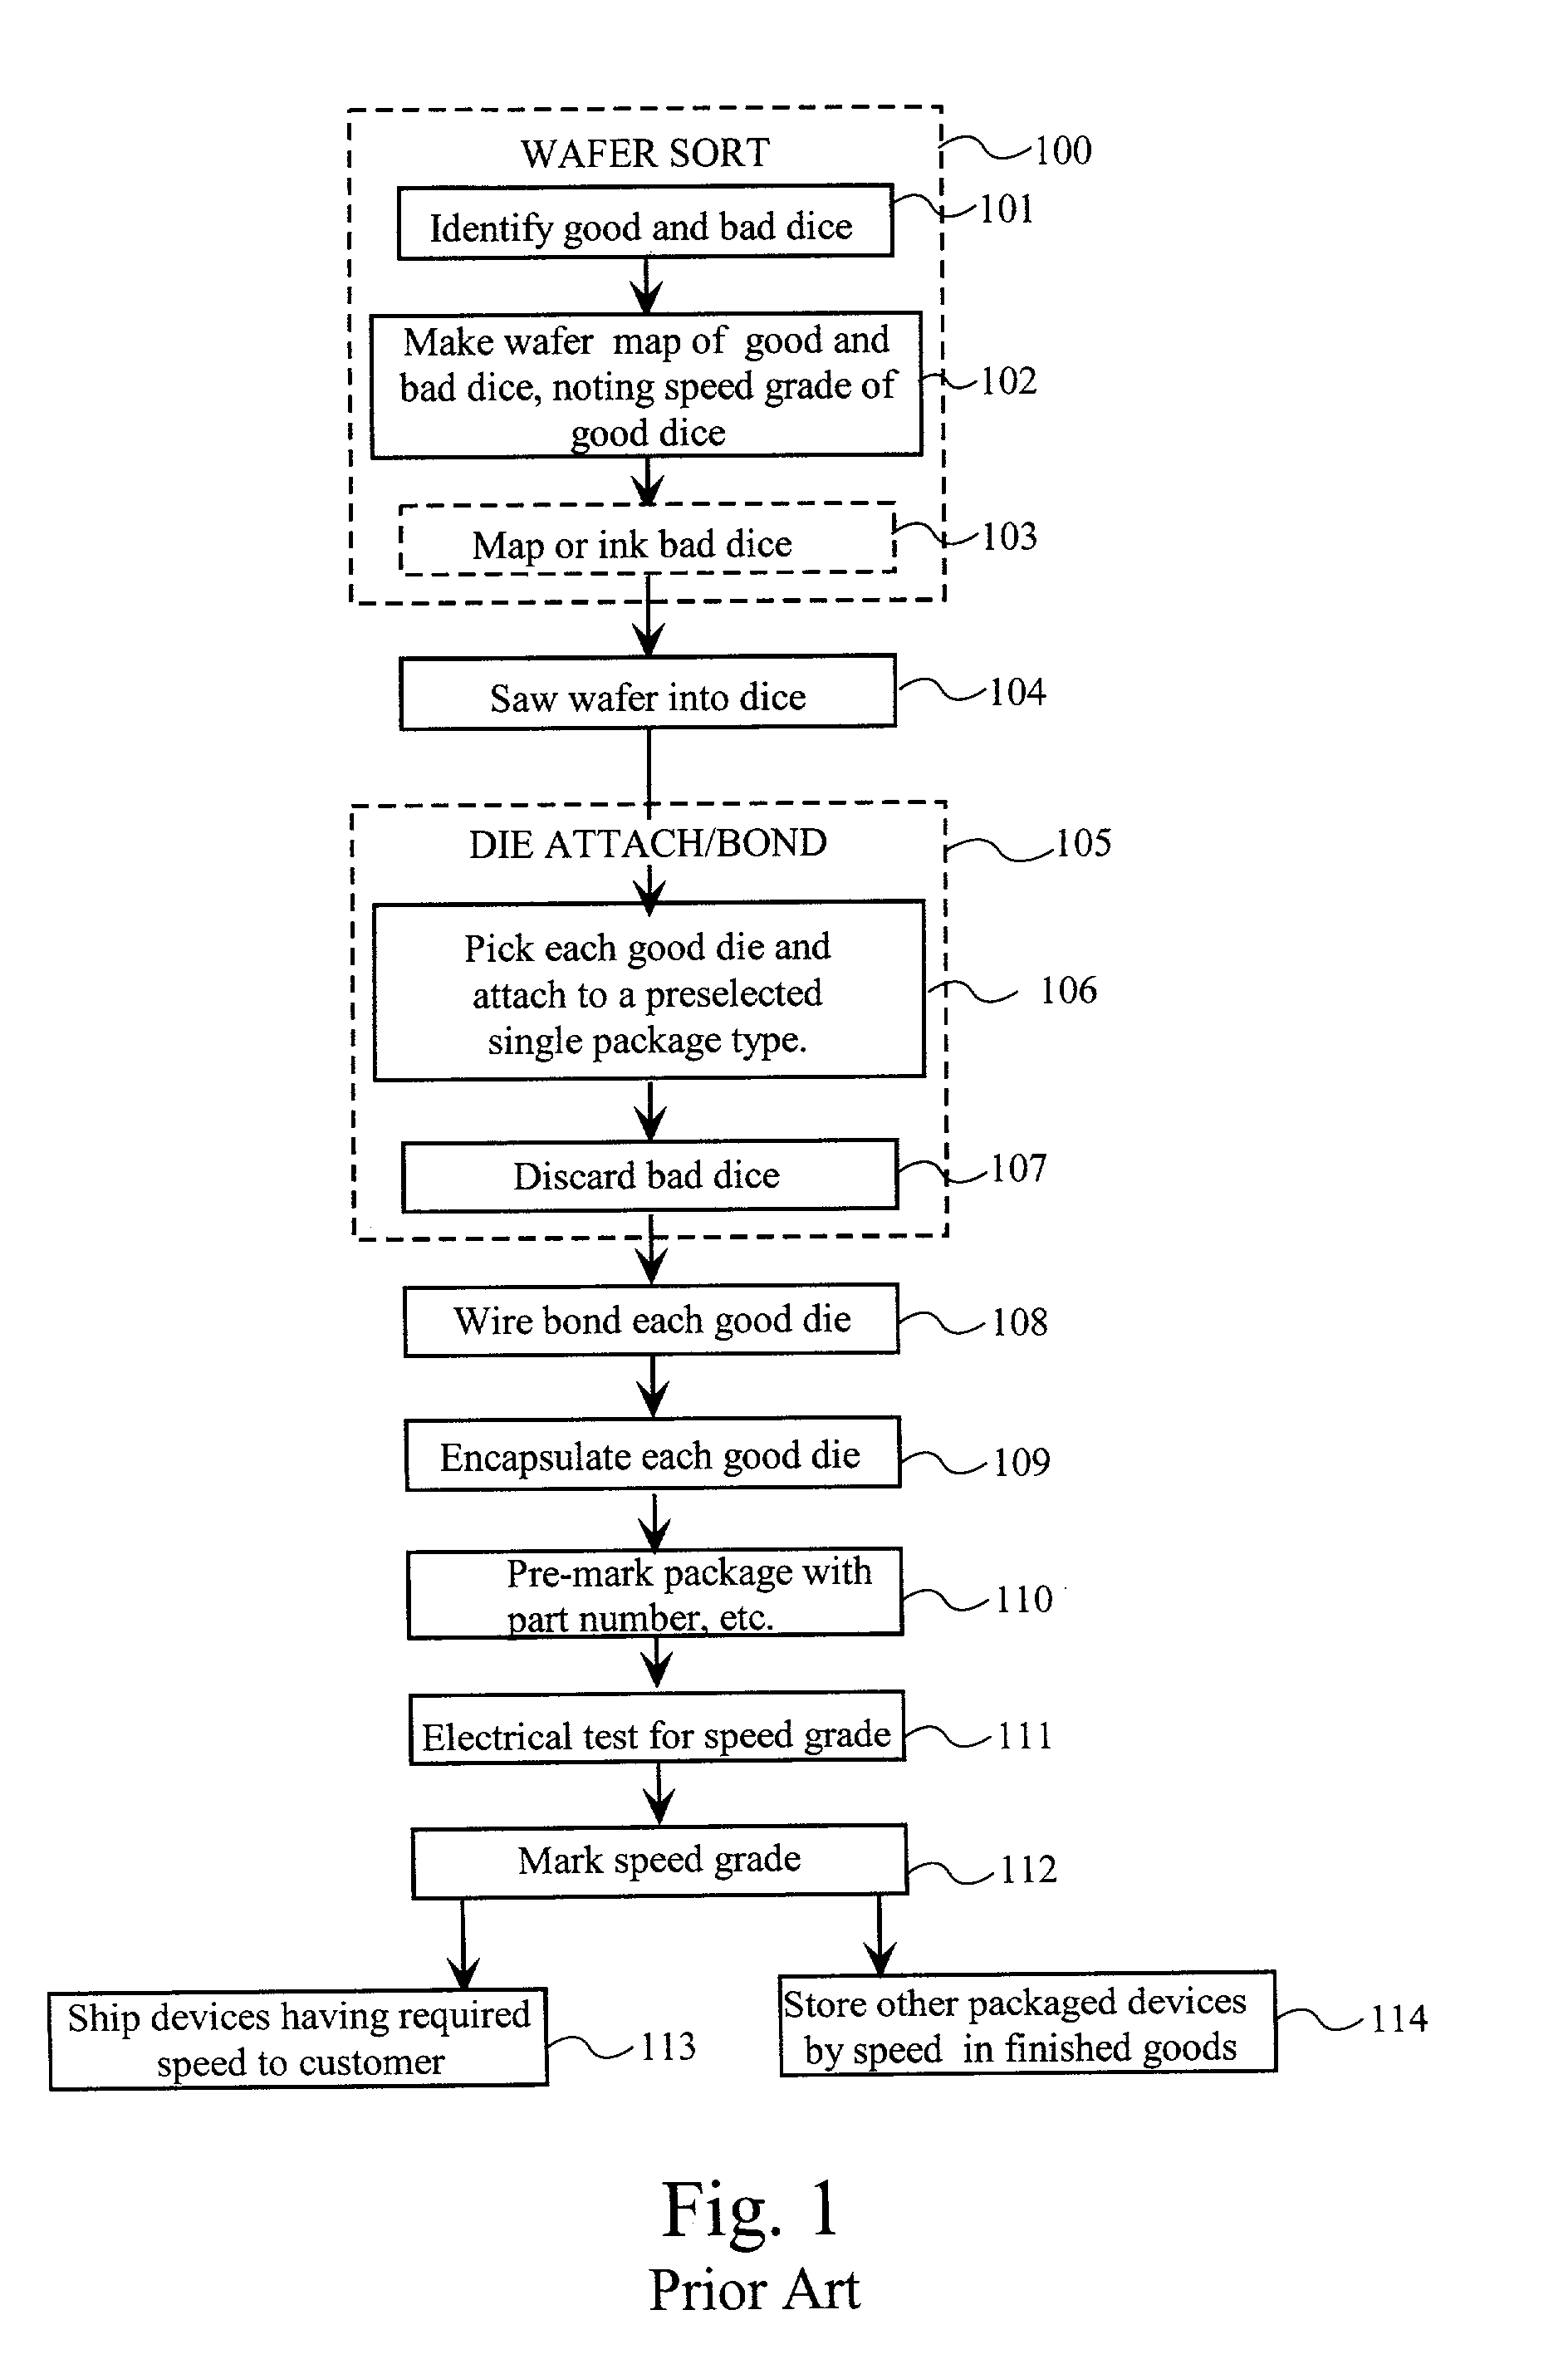 Method of sorting dice by speed during die bond assembly and packaging to customer order